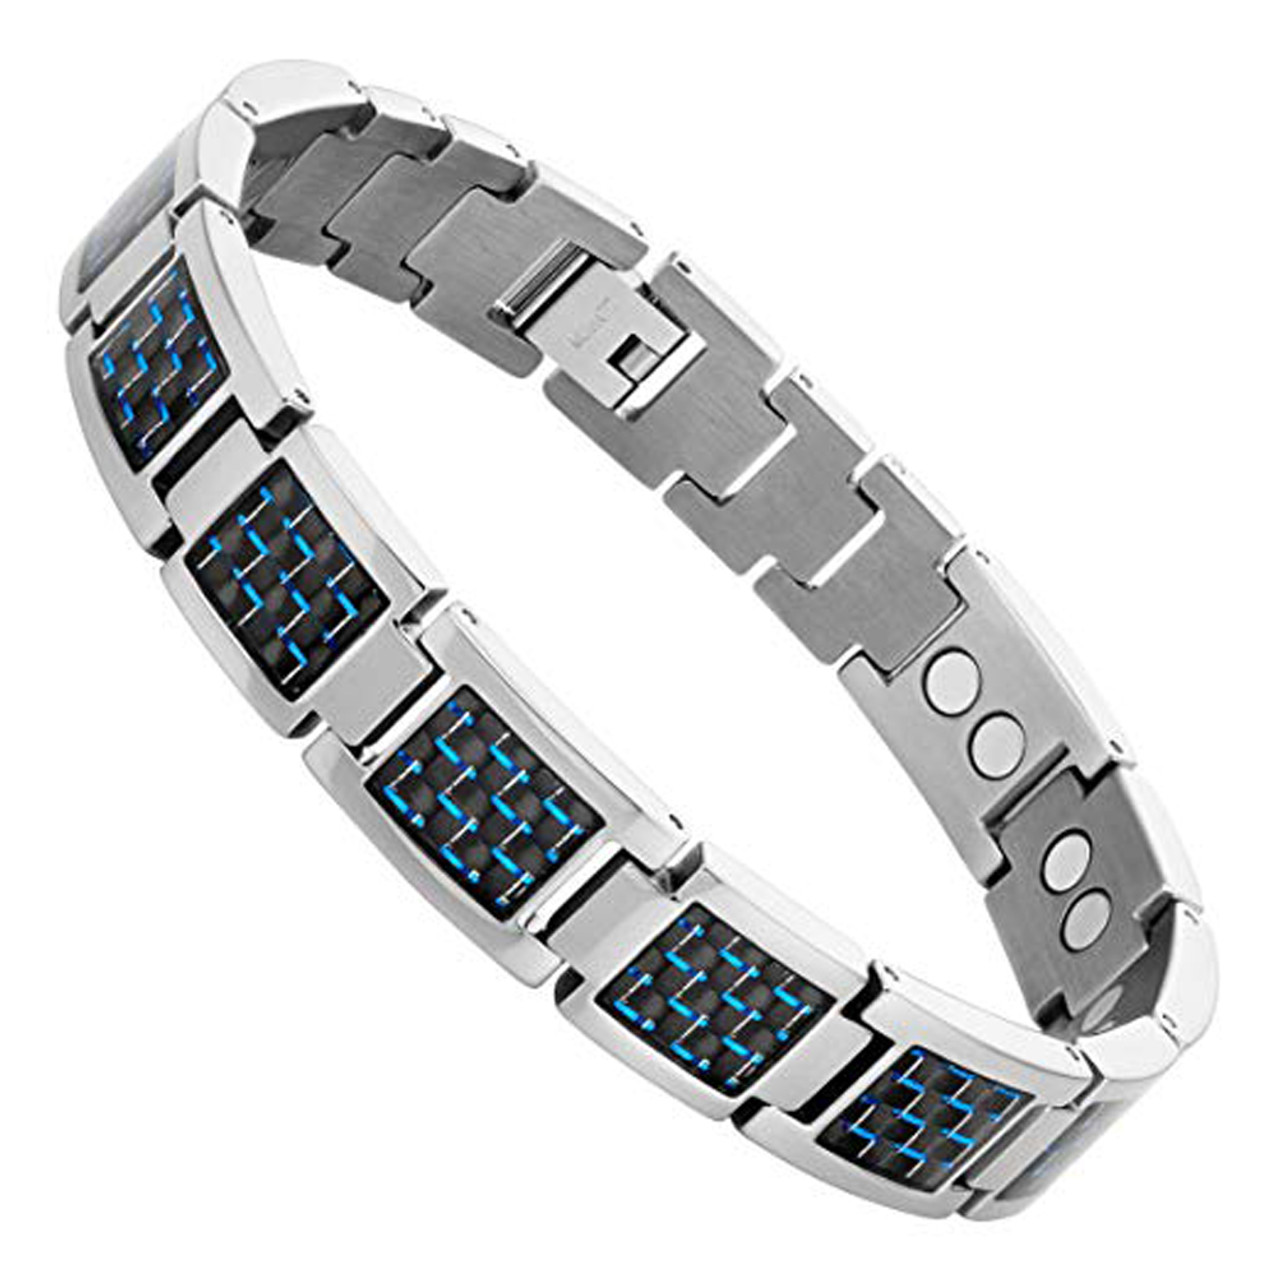 Watch Bands Carbon Fiber Pattern Genuine Leather Strap 20mm 22m For  Watchband Wristwatches Band Leather Watch Bracelet 2301301356305 From Z08u,  $20.74 | DHgate.Com